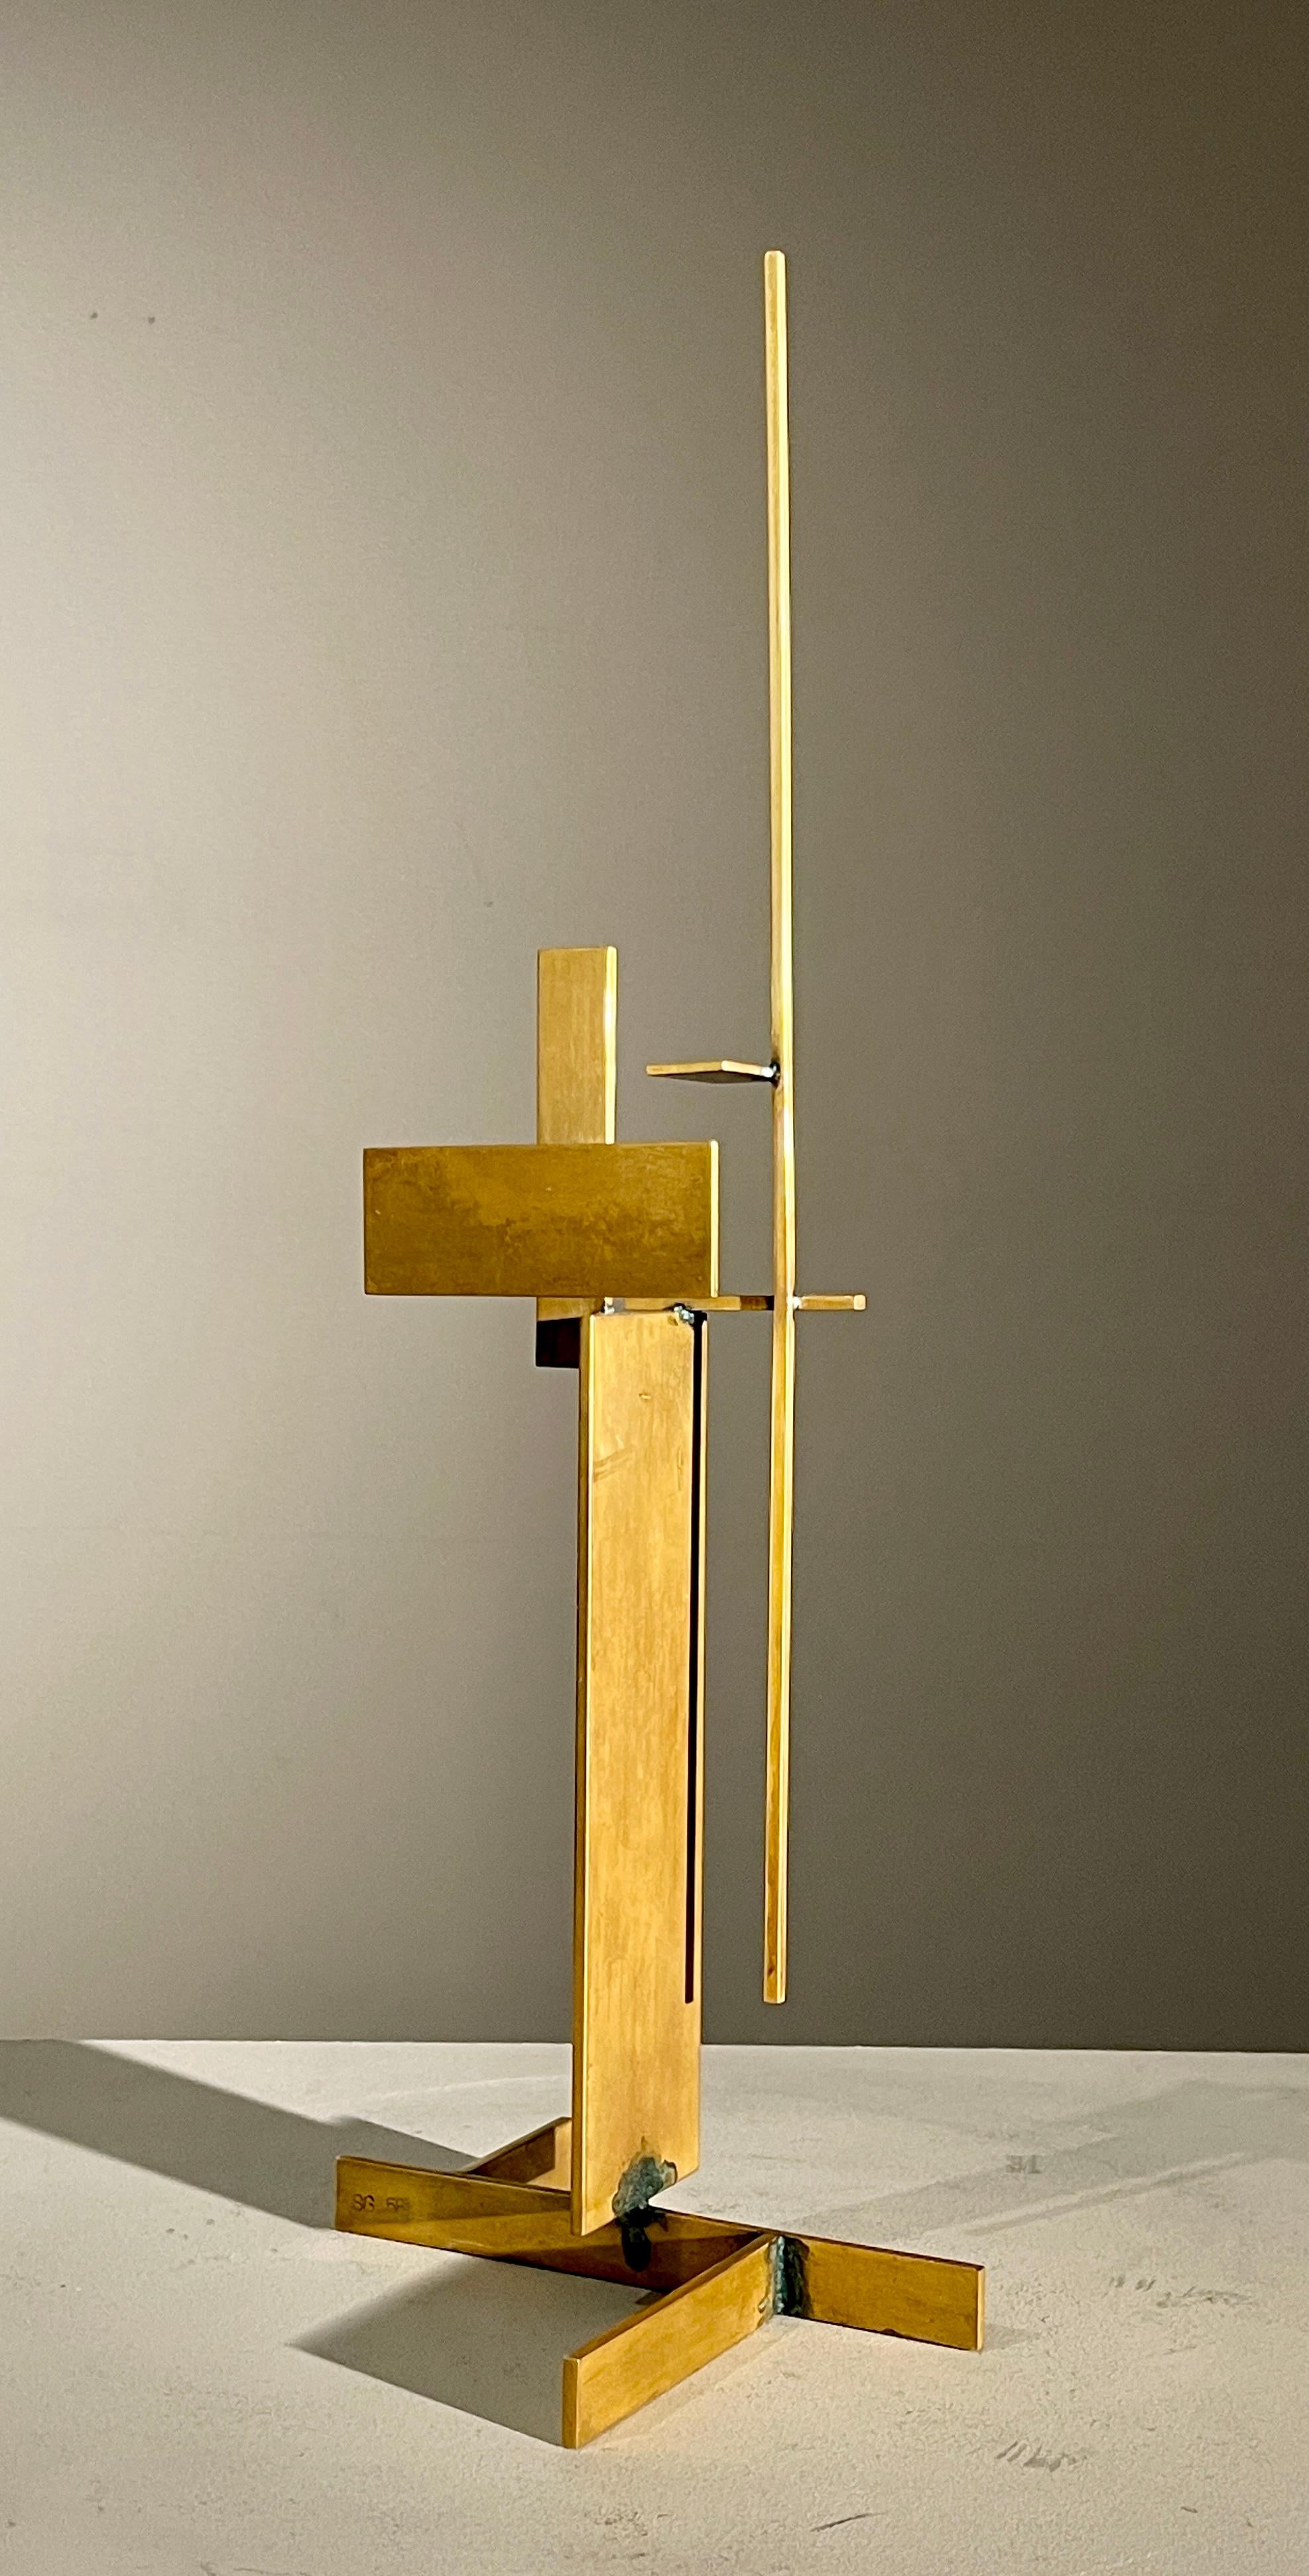 Sidney Gordin
Untitled, 1958
Signed with initials and dated
Bronze
15 1/2